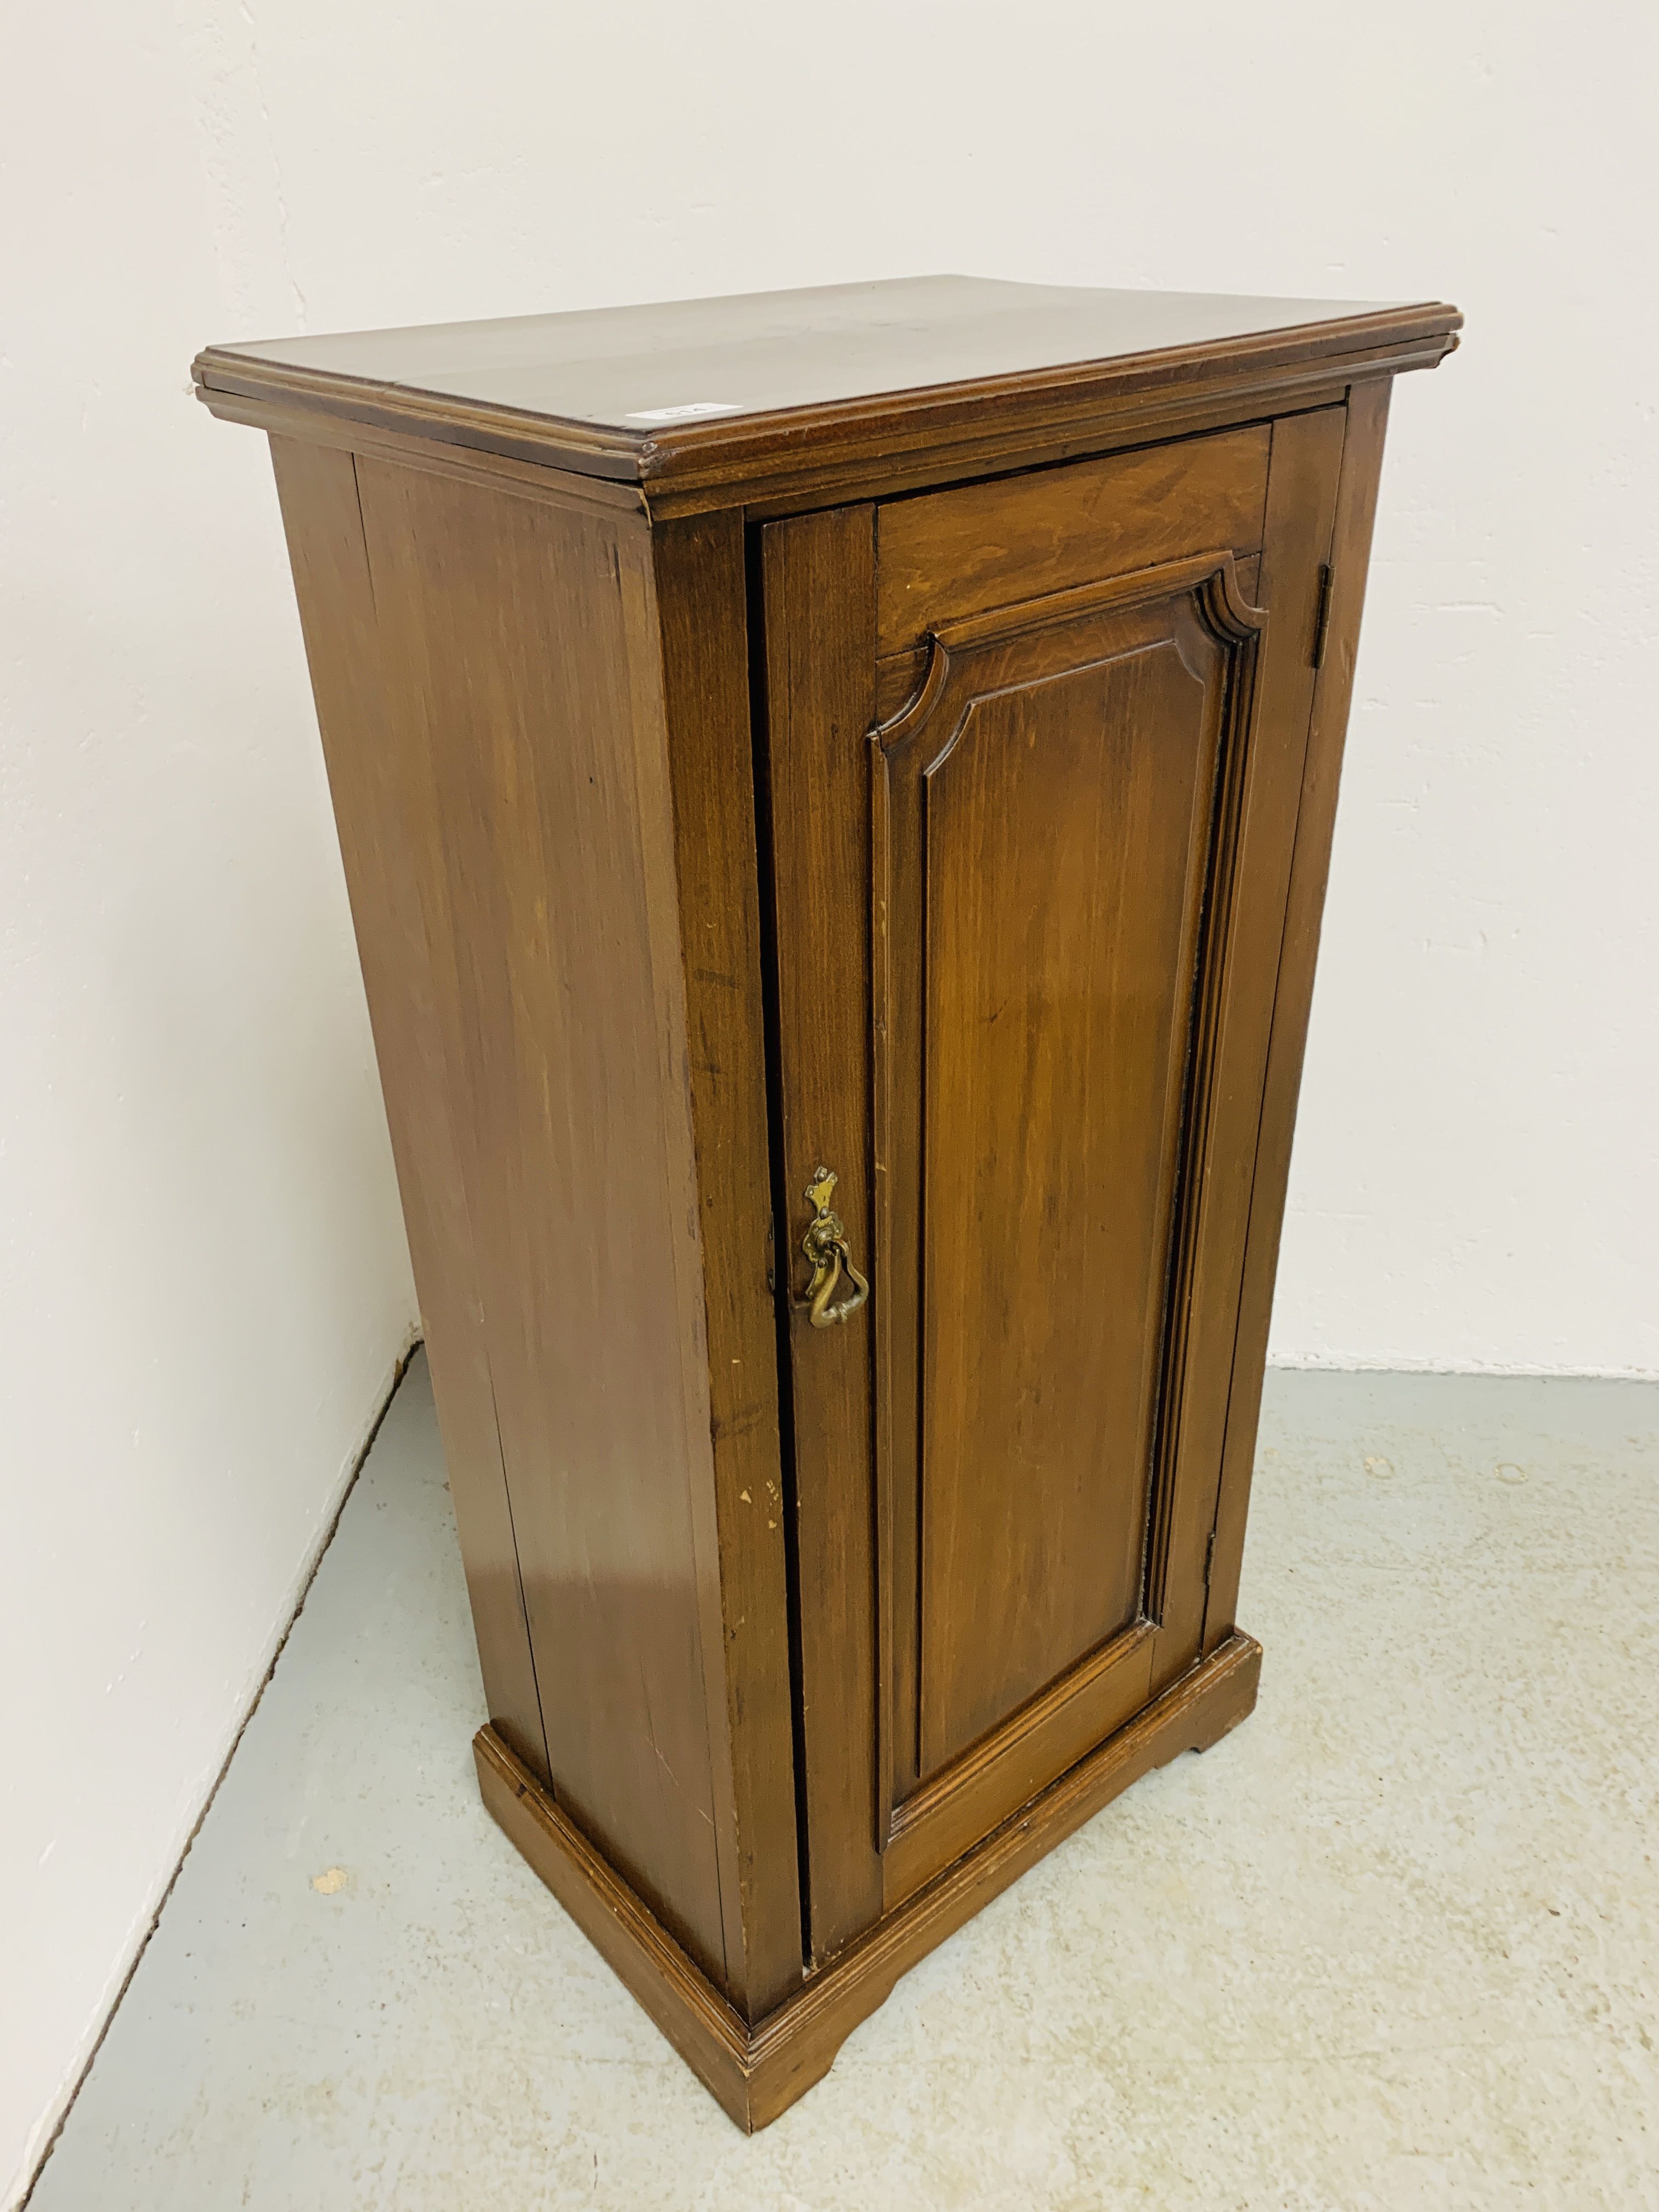 A HARDWOOD CABINET WITH PANEL DOOR AND SHELVED INTERIOR - W 50CM. D 35CM. H 100CM. - Image 3 of 7